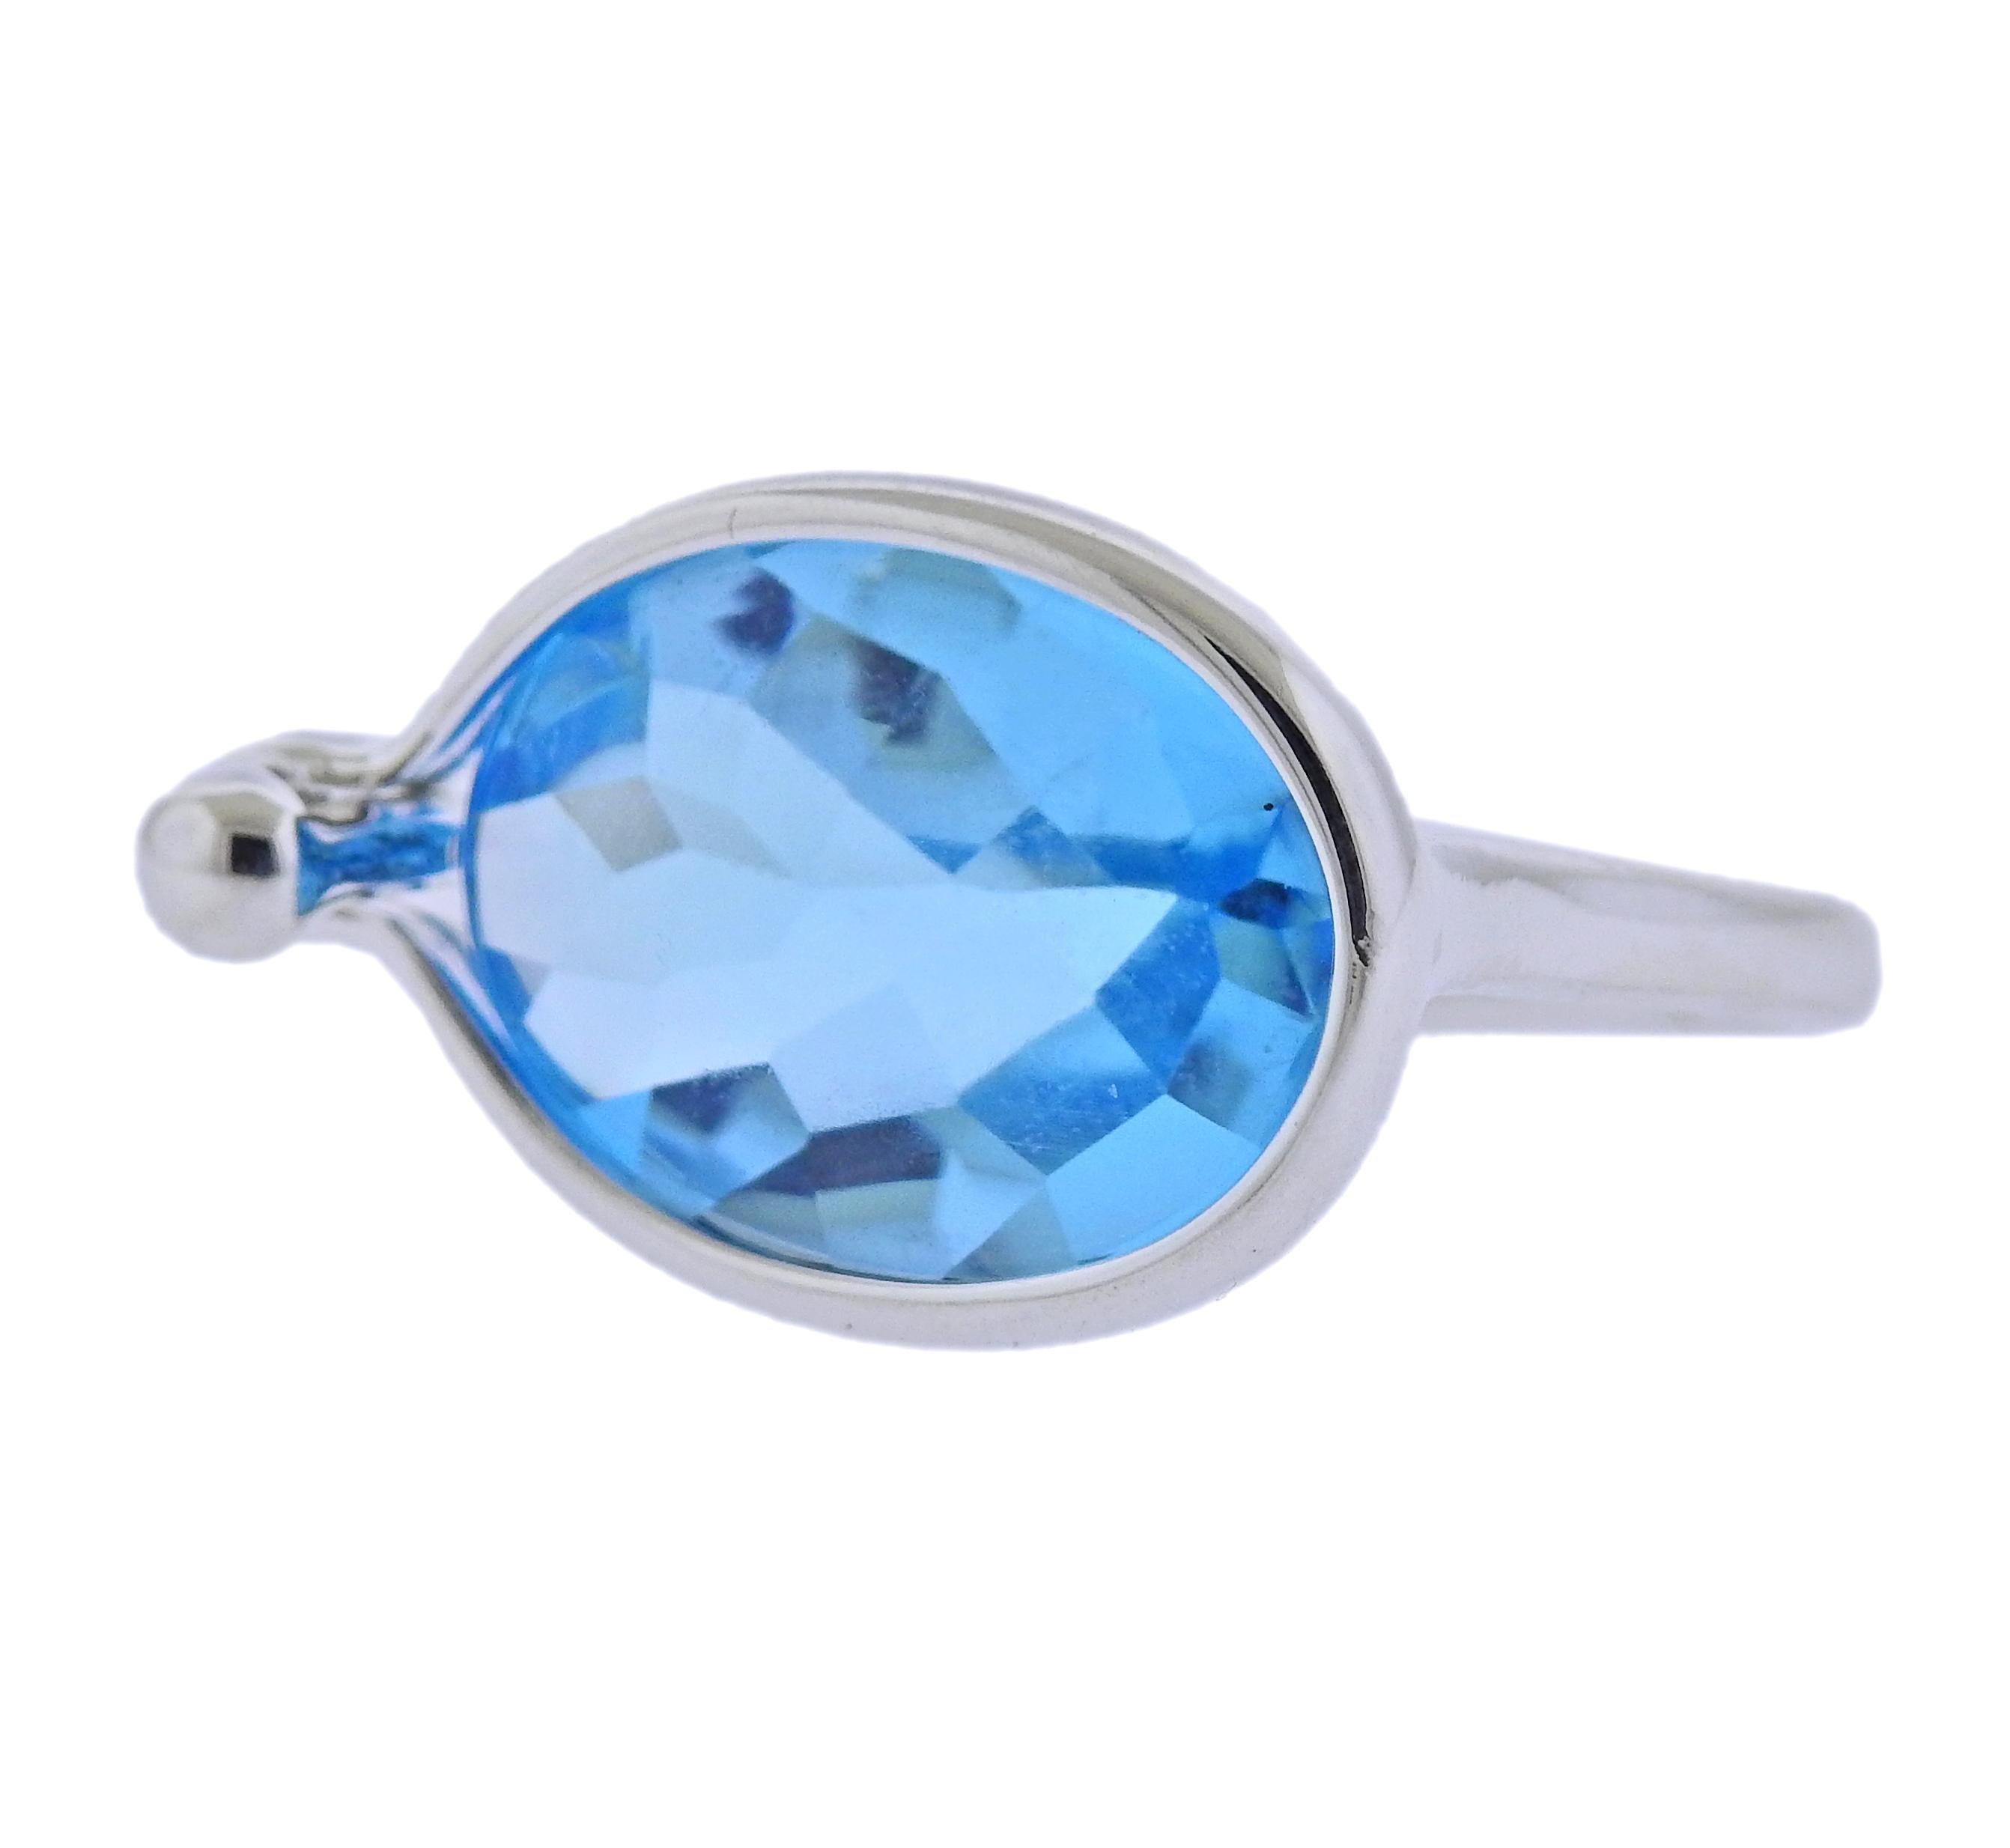 Brand new Georg Jensen sterling silver ring from Savannah collection, with blue topaz. Top of the ring - 15mm x 24mm. Available in size: 54. Model # 10003055. Marked: GJ mark, 925 S, 628. Weight - 5.8 grams.